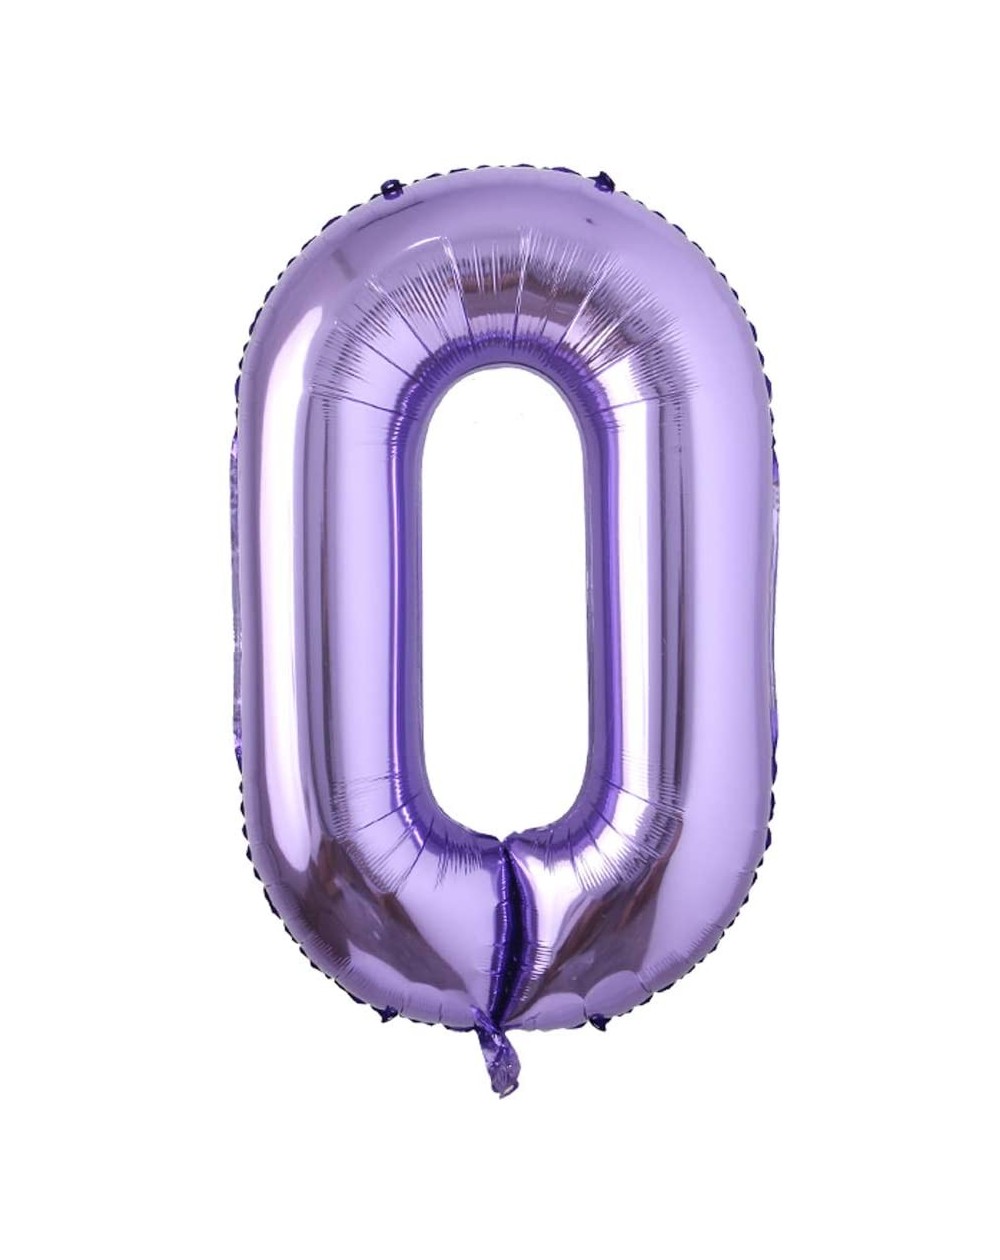 Balloons 40inch Purple Helium Foil Number Balloons Large Figures Inflatable Balls Baby Shower Birthday Wedding Decoration Par...